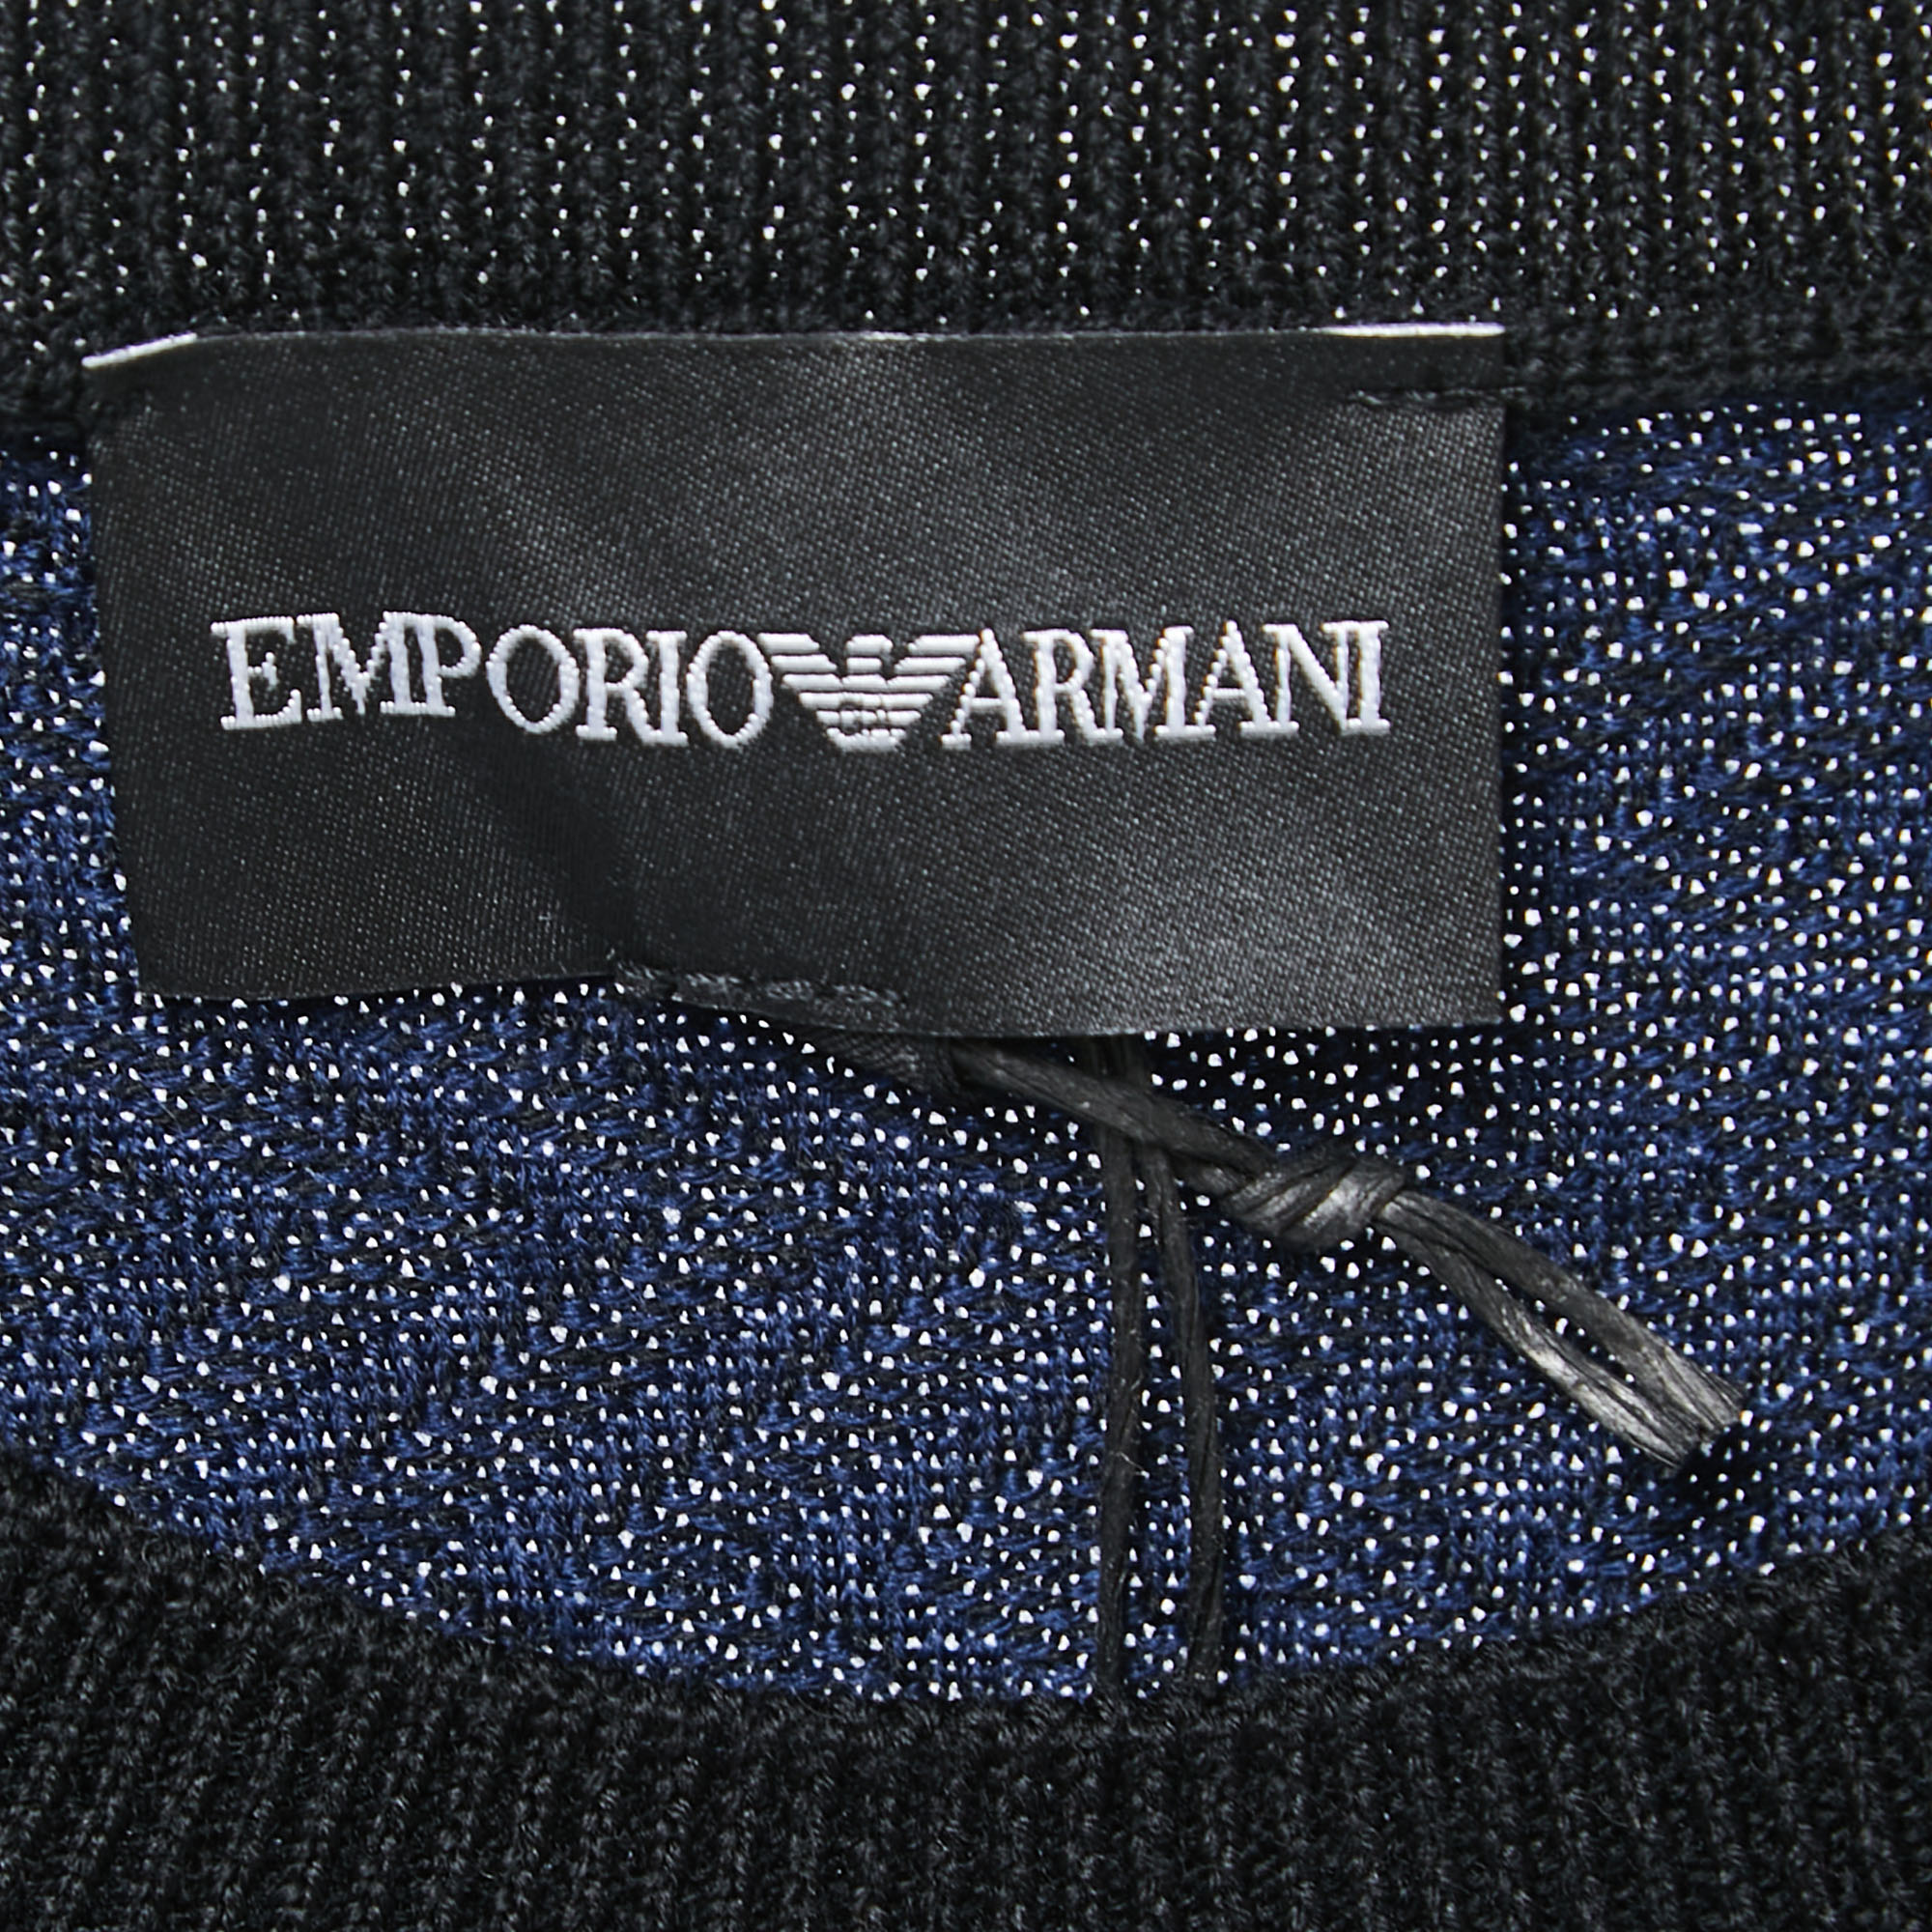 Emporio Armani Navy Blue/Black Patterned Wool Knit Crew Neck Sweater 3XL